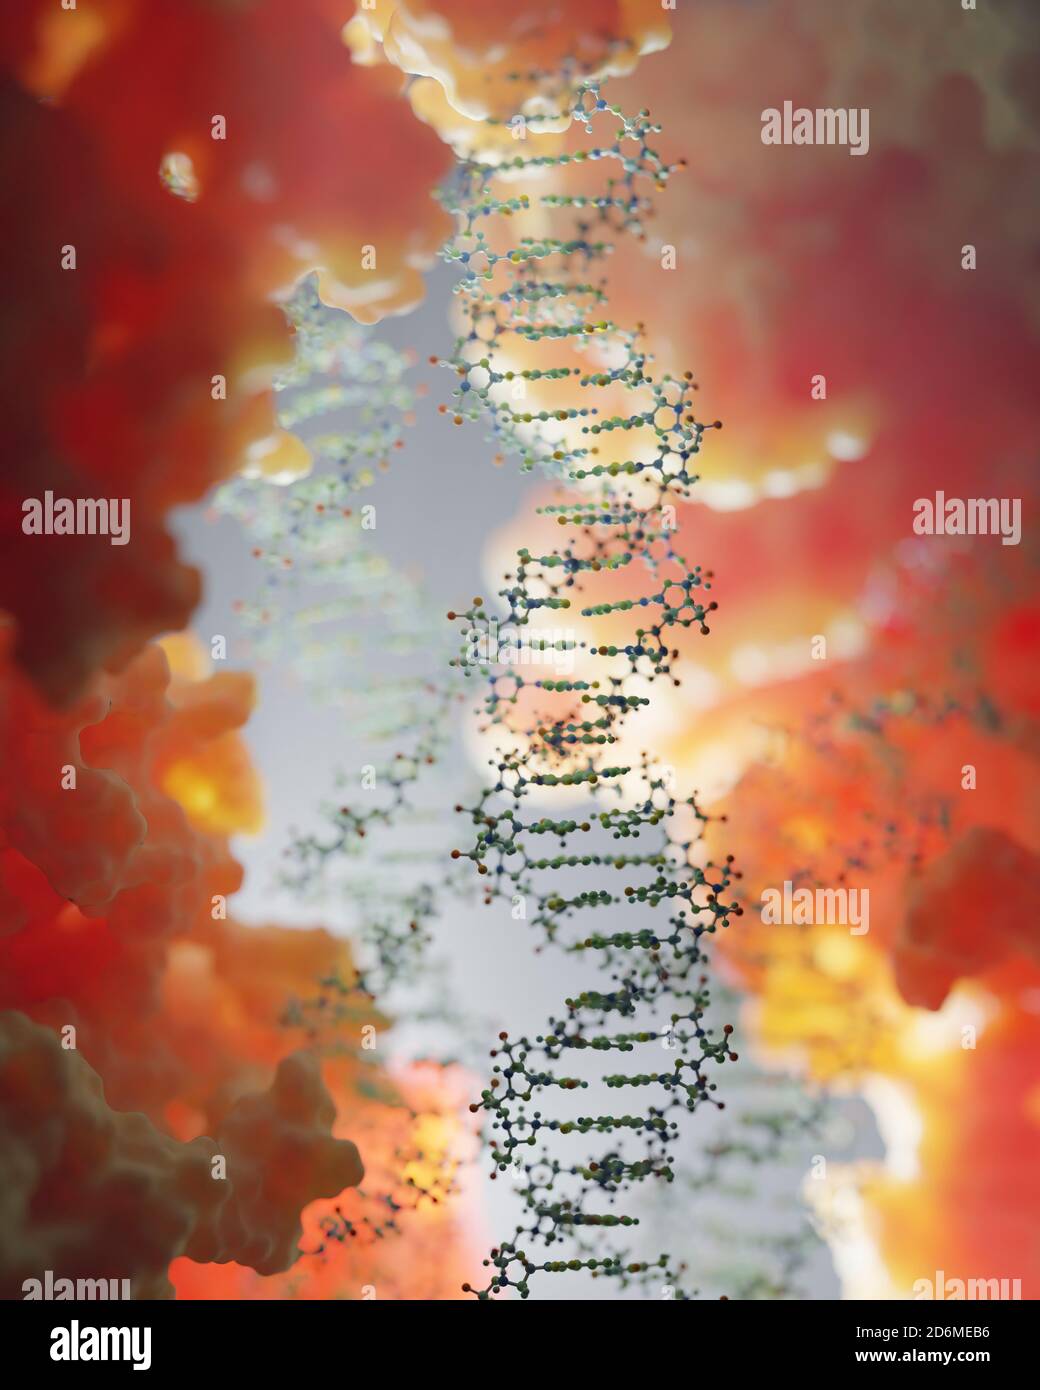 DNA, carrying genetic instructions, resides in the cells nucleus where it interacts with various proteins in various processes, such as replication. Stock Photo